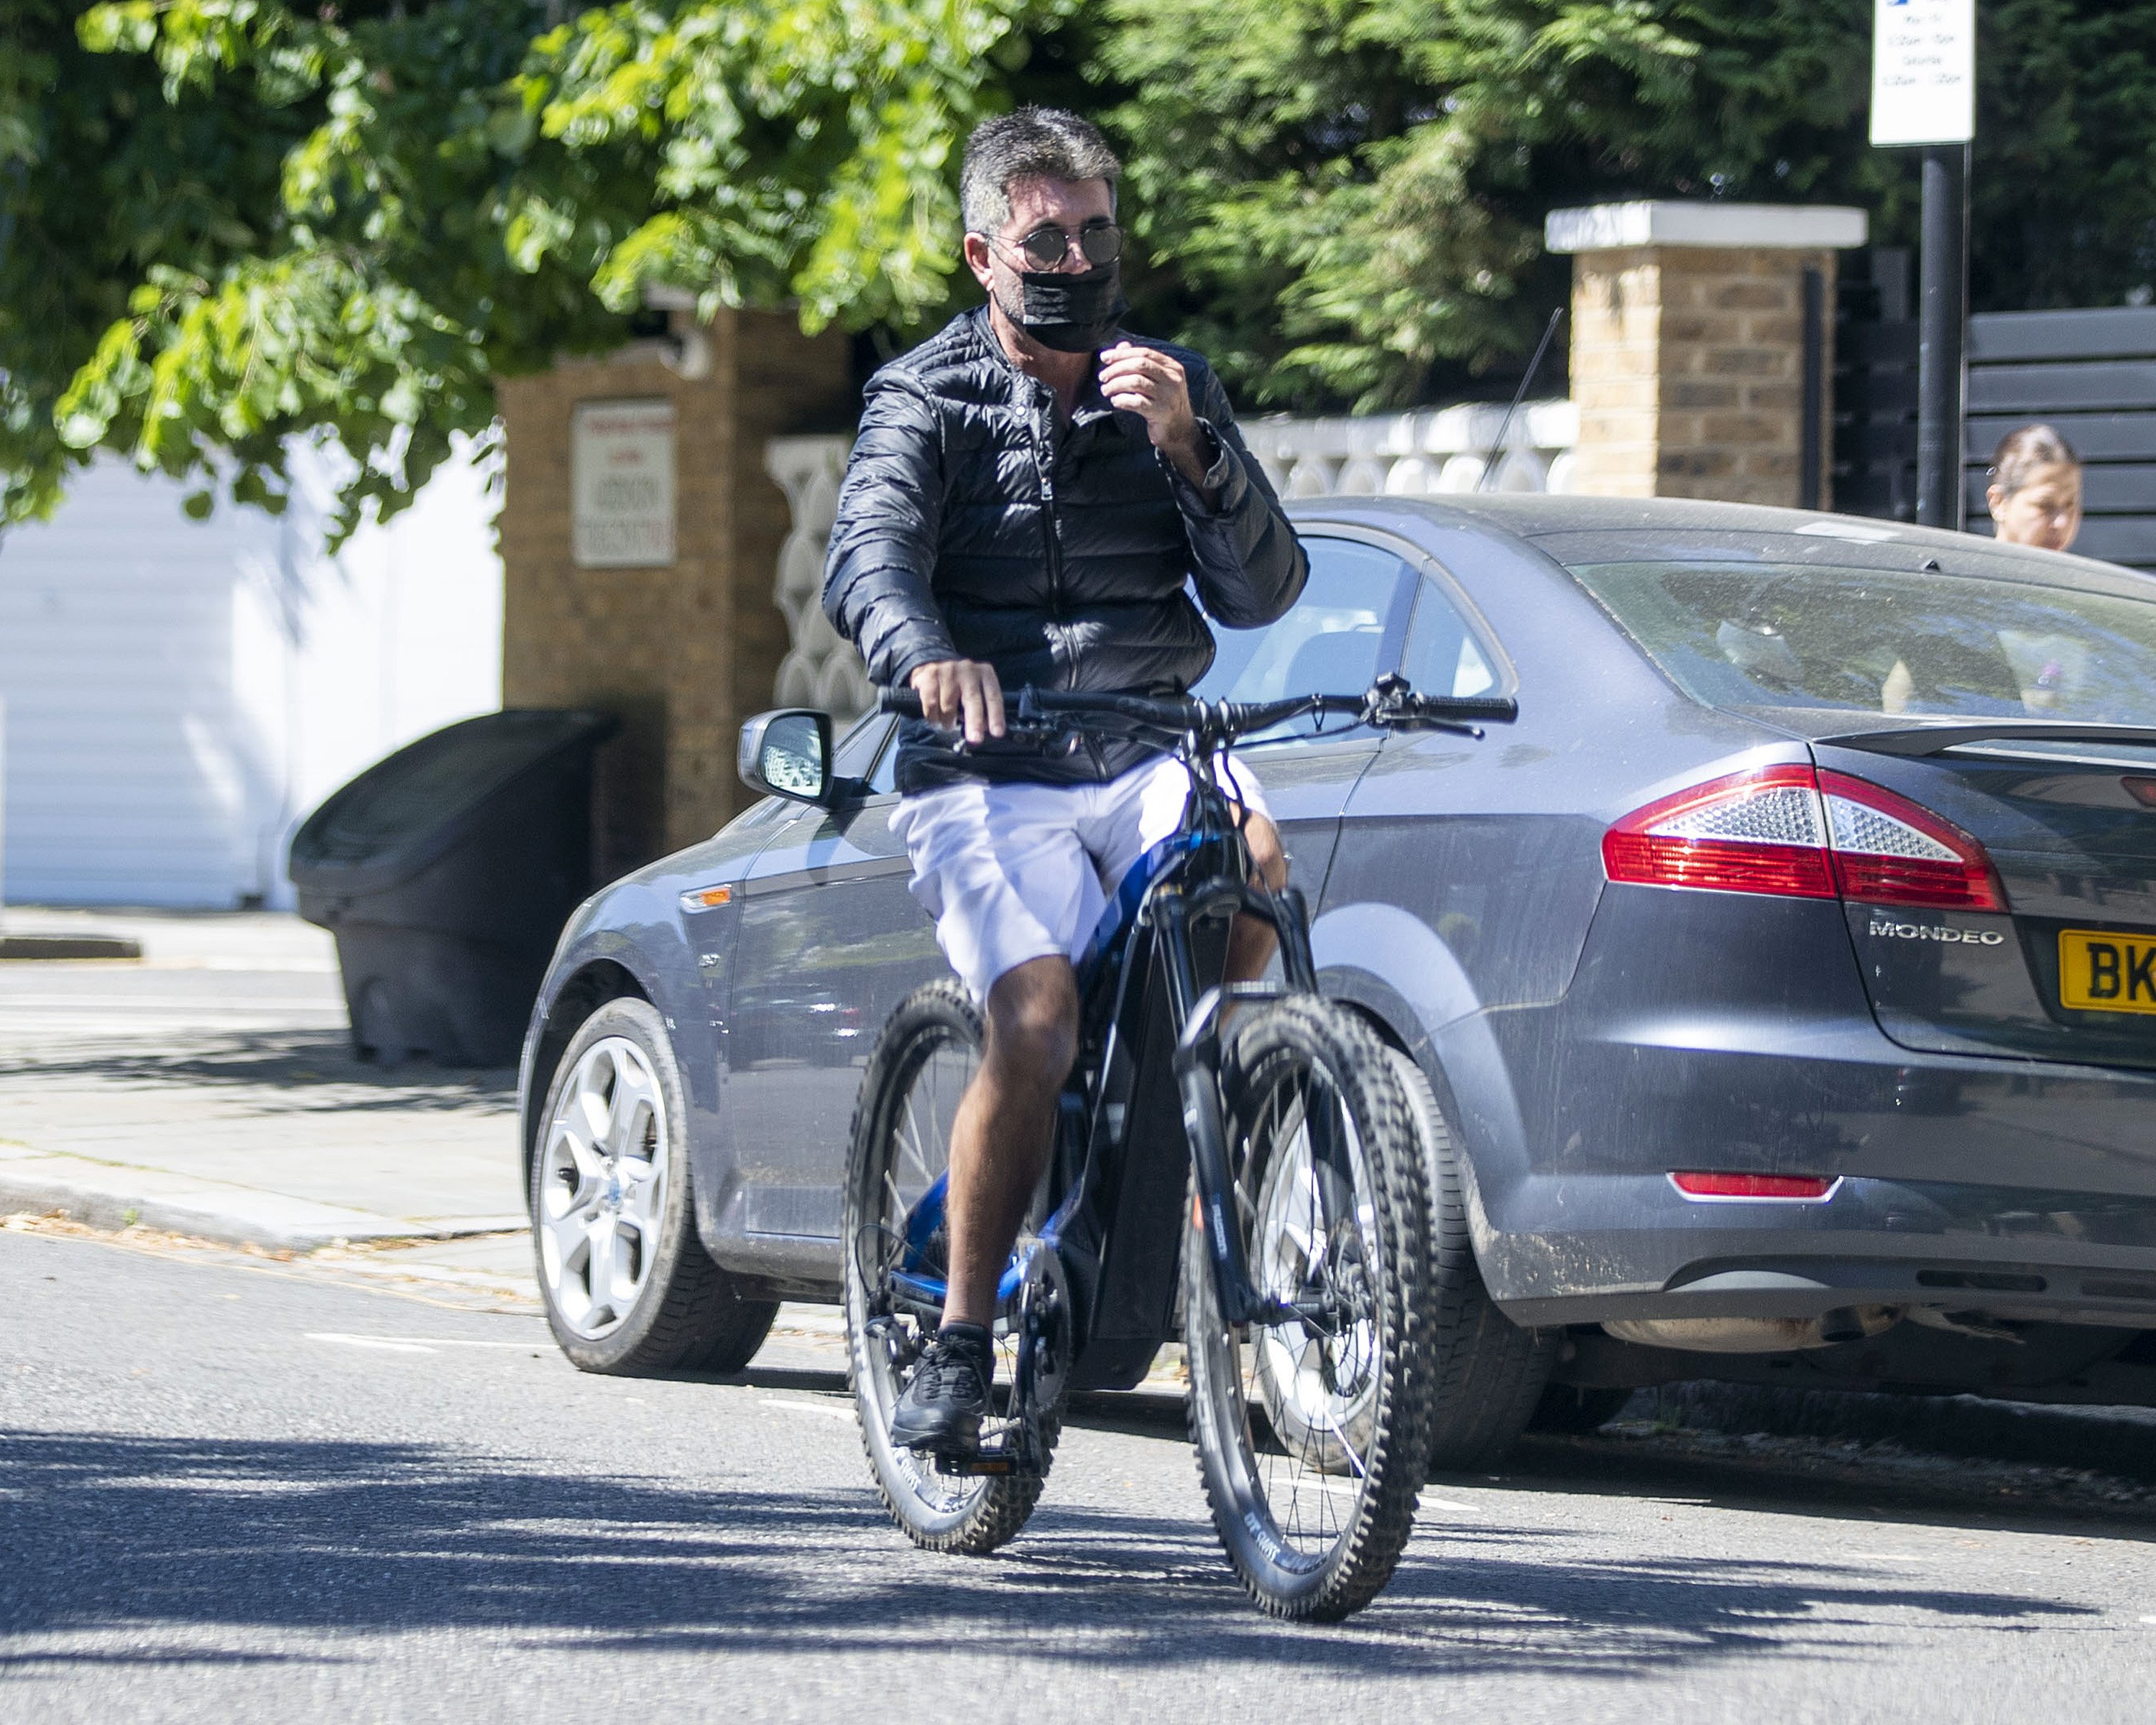 Simon Cowell rides an e-bike in West London on June 16, 2021, in London, England. | Source: Getty Images